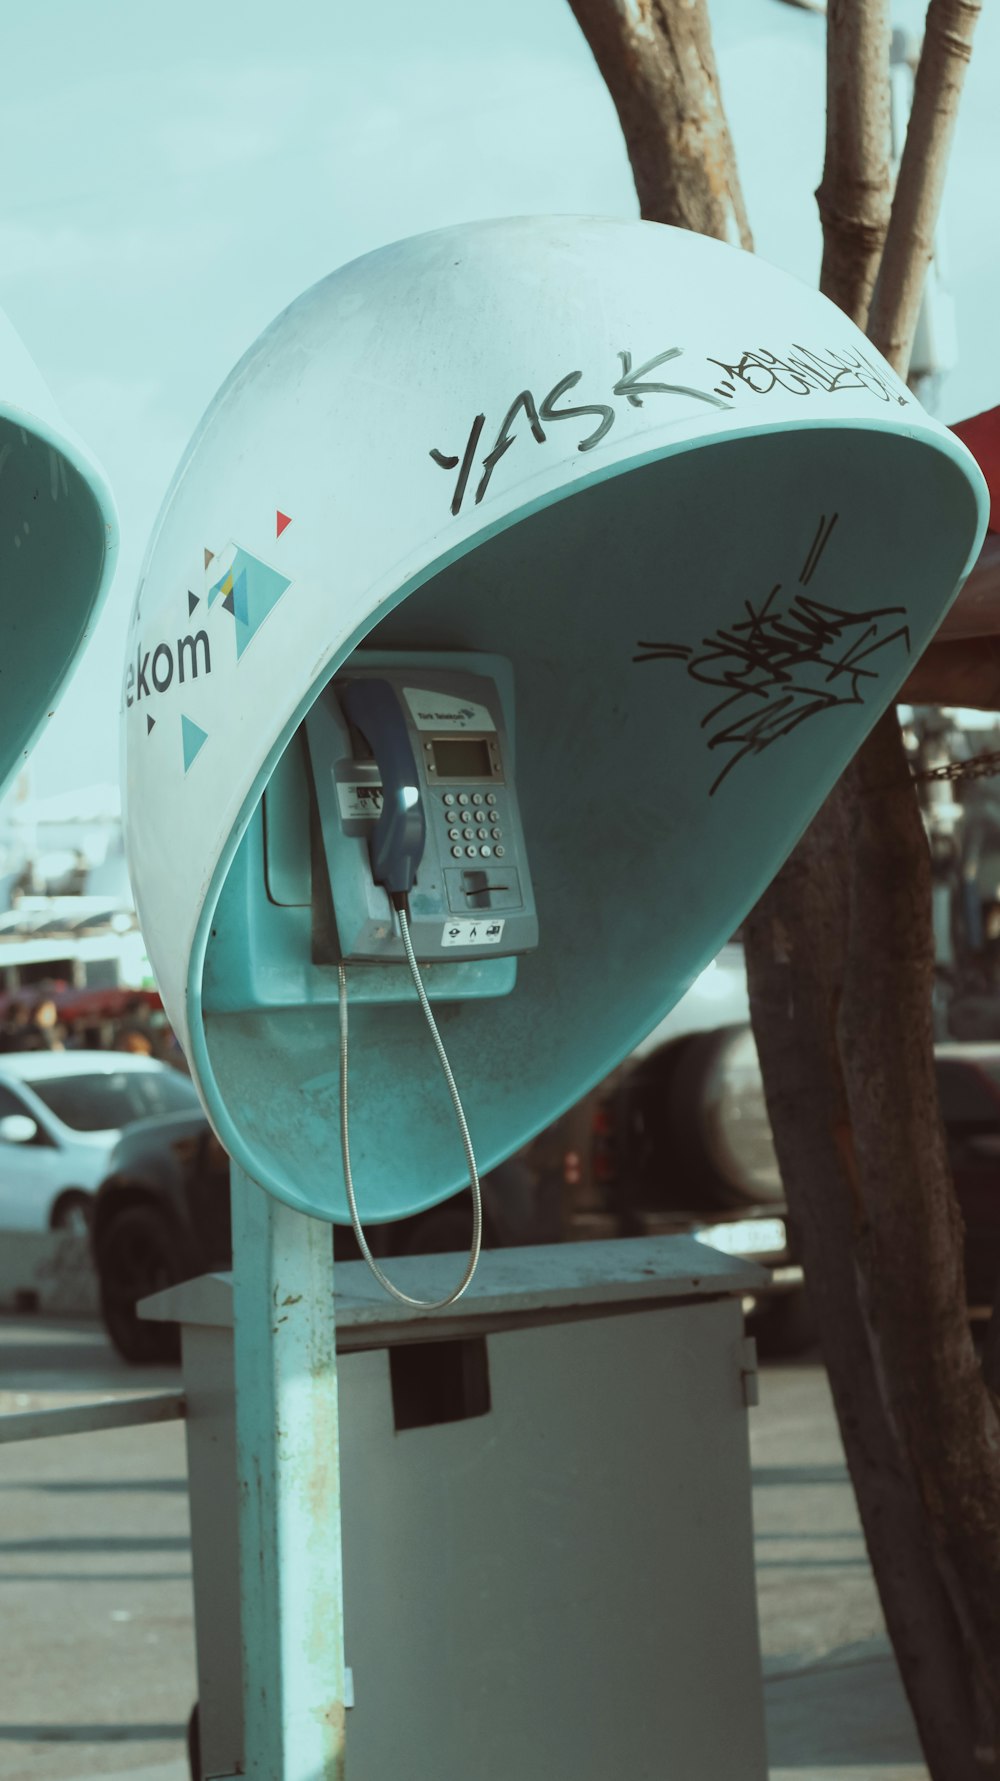 an old fashioned pay phone on a pole